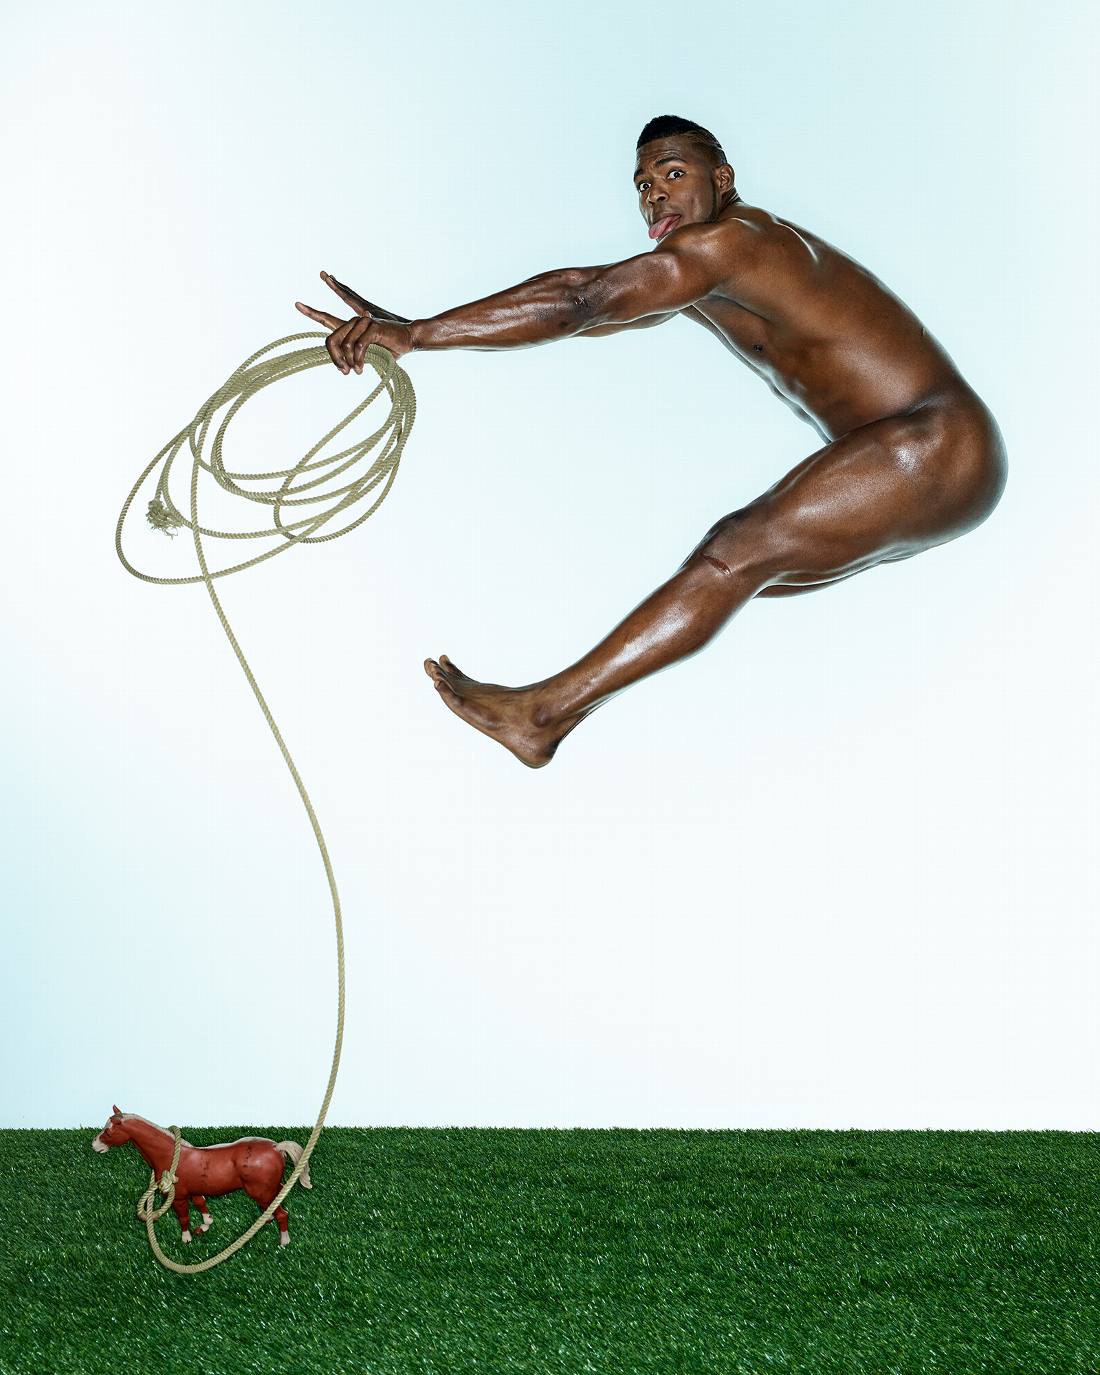 Yasiel Puig on X: After 4 years I finally decided to do these amazing and  incredible pictures with @espnmag I hope everyone enjoyed them as much as I  did. Thank you @espnmag